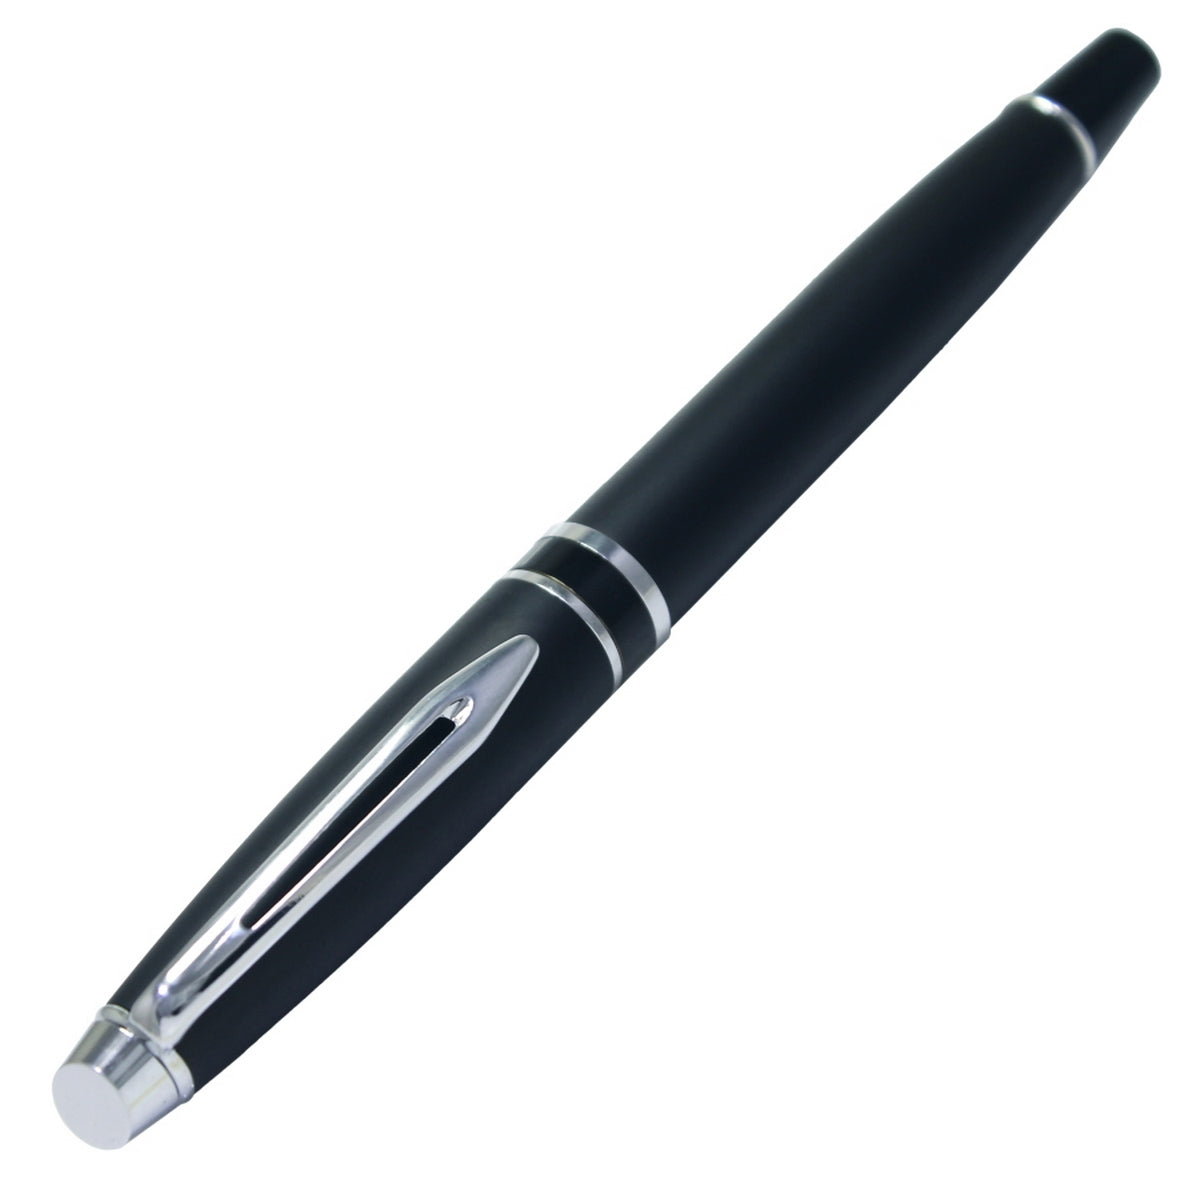 Premium Black Color Fountain Pen- for Office, College, Personal Use- Perfect for Gifting- Maharashtra (JA)